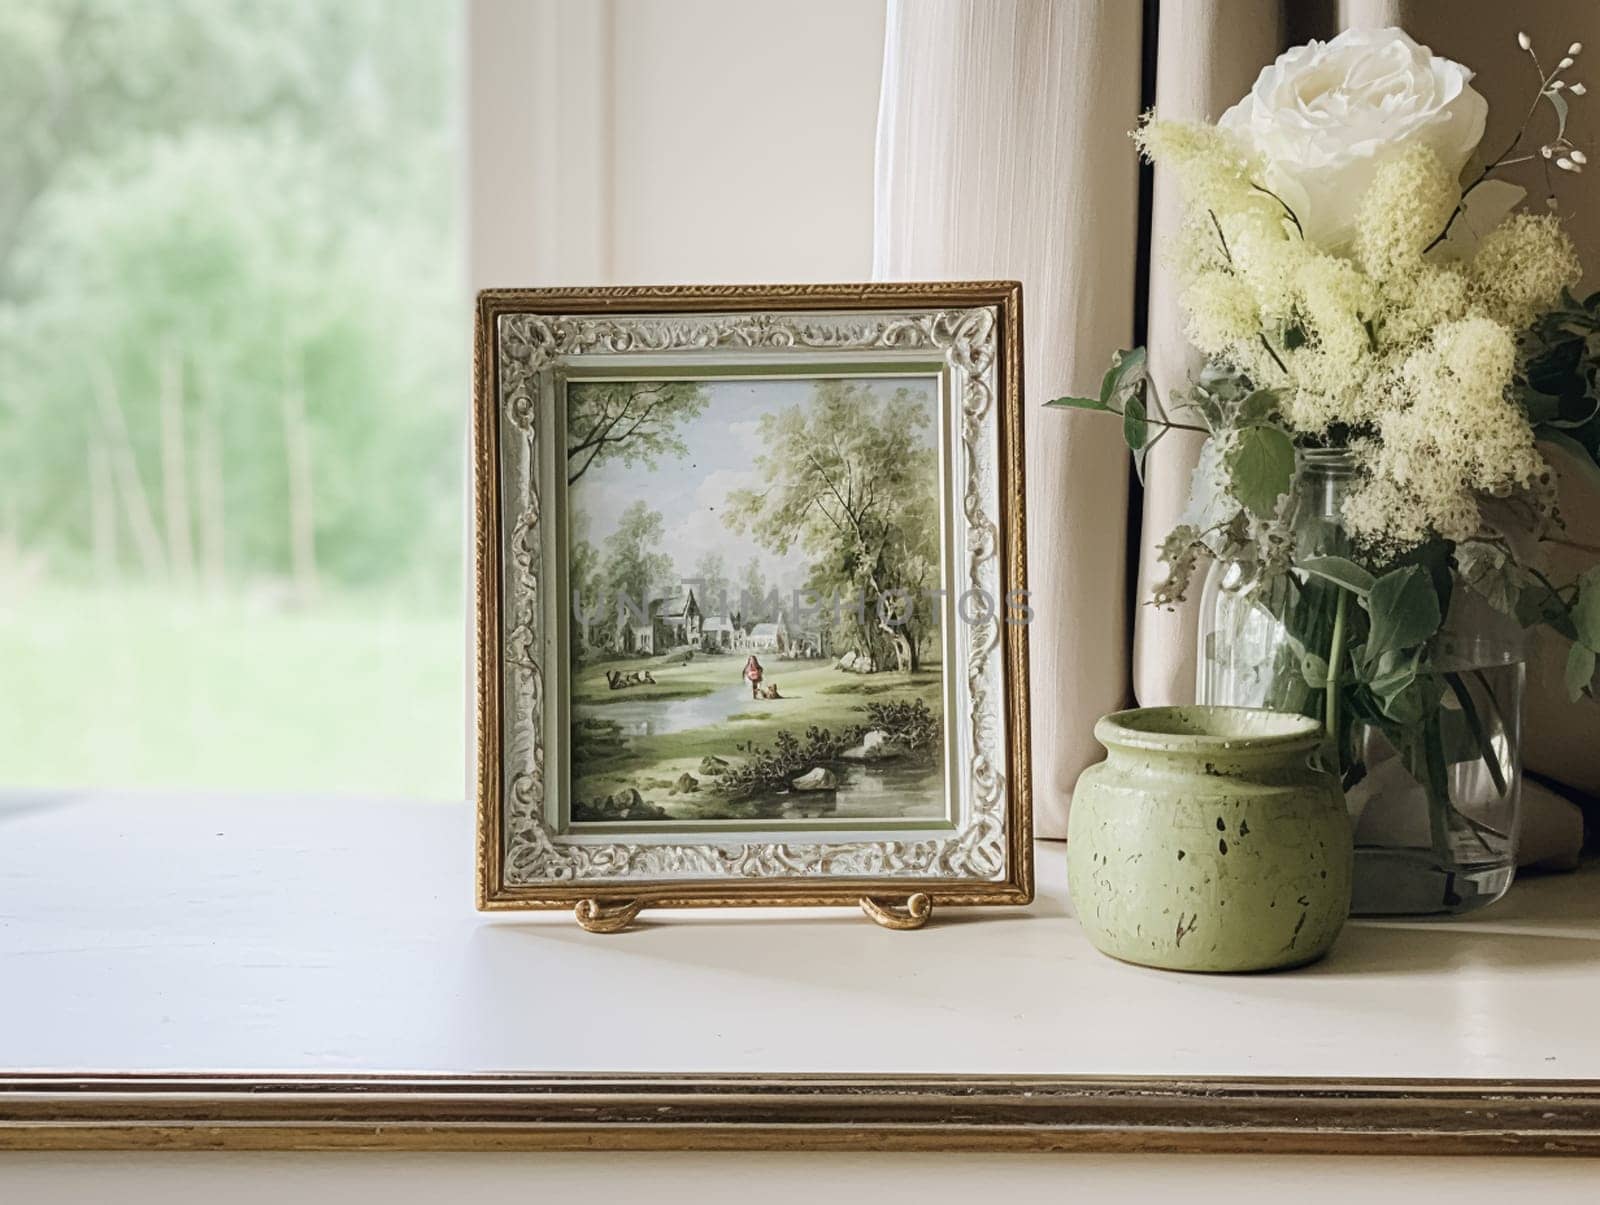 Charming vintage art frame in the elegant interior, wall and home decor